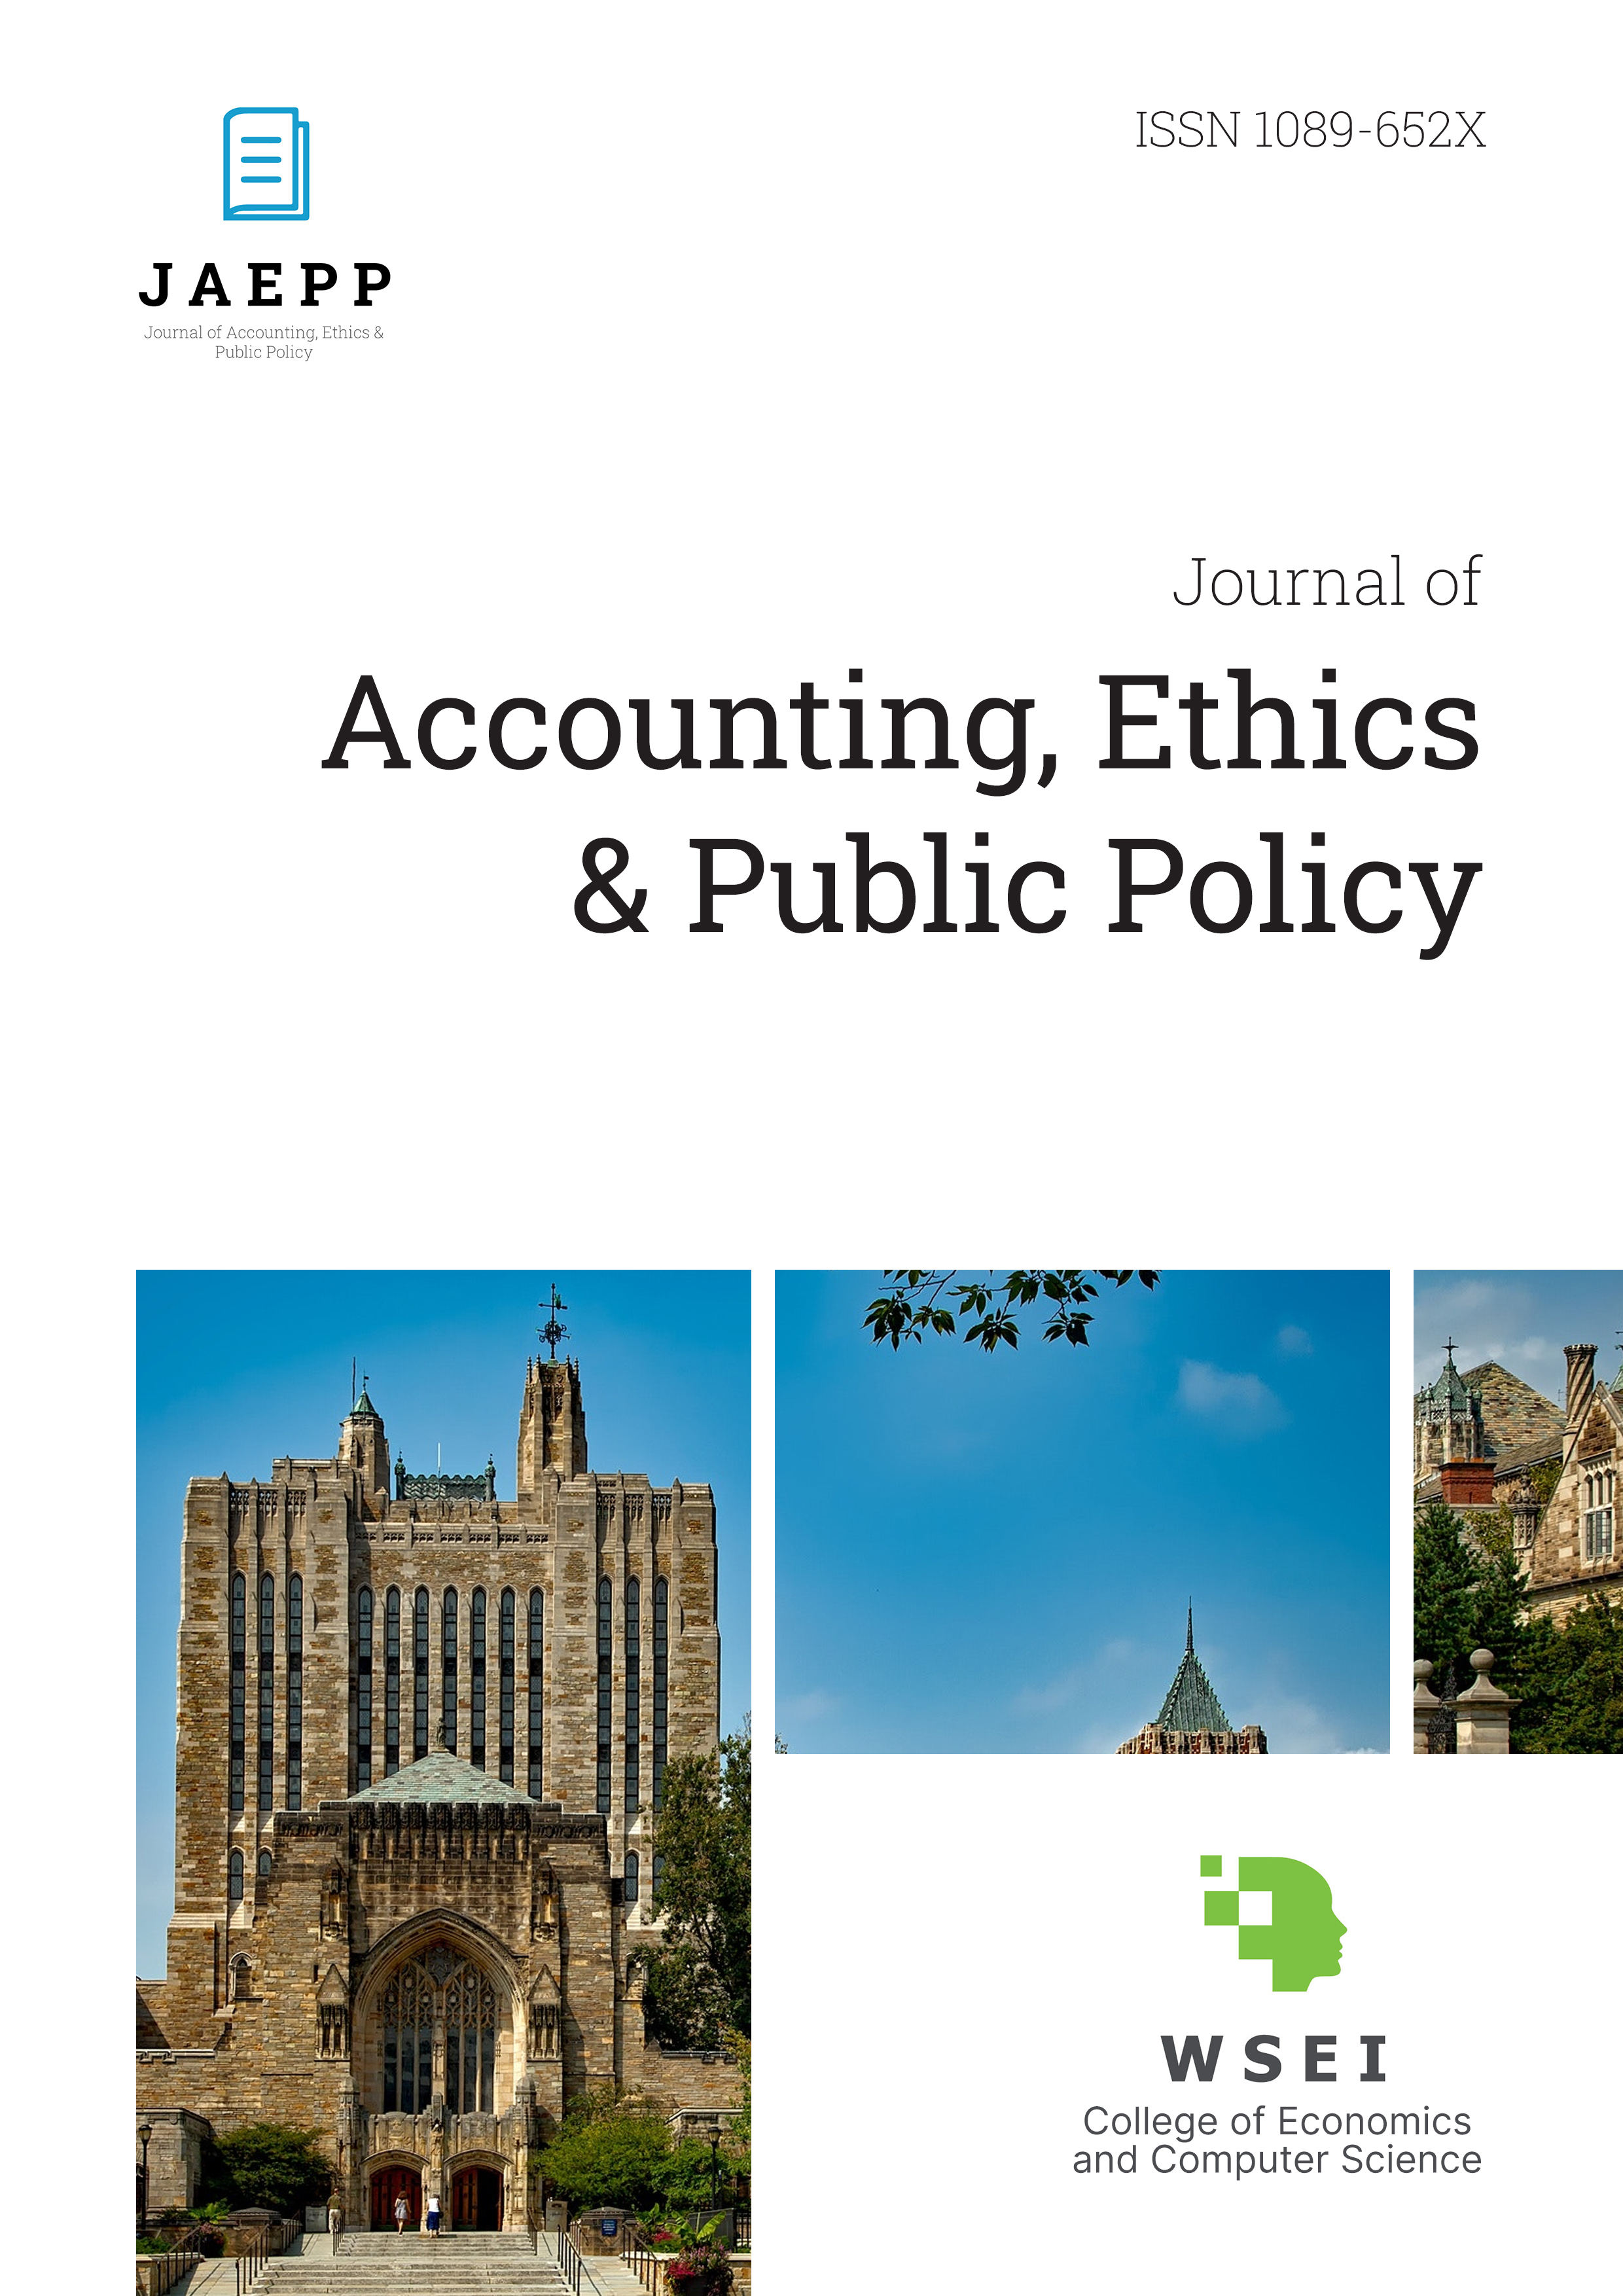 					View Vol. 23 No. 4 (2022): Journal of Accounting, Ethics & Public Policy, JAEPP
				